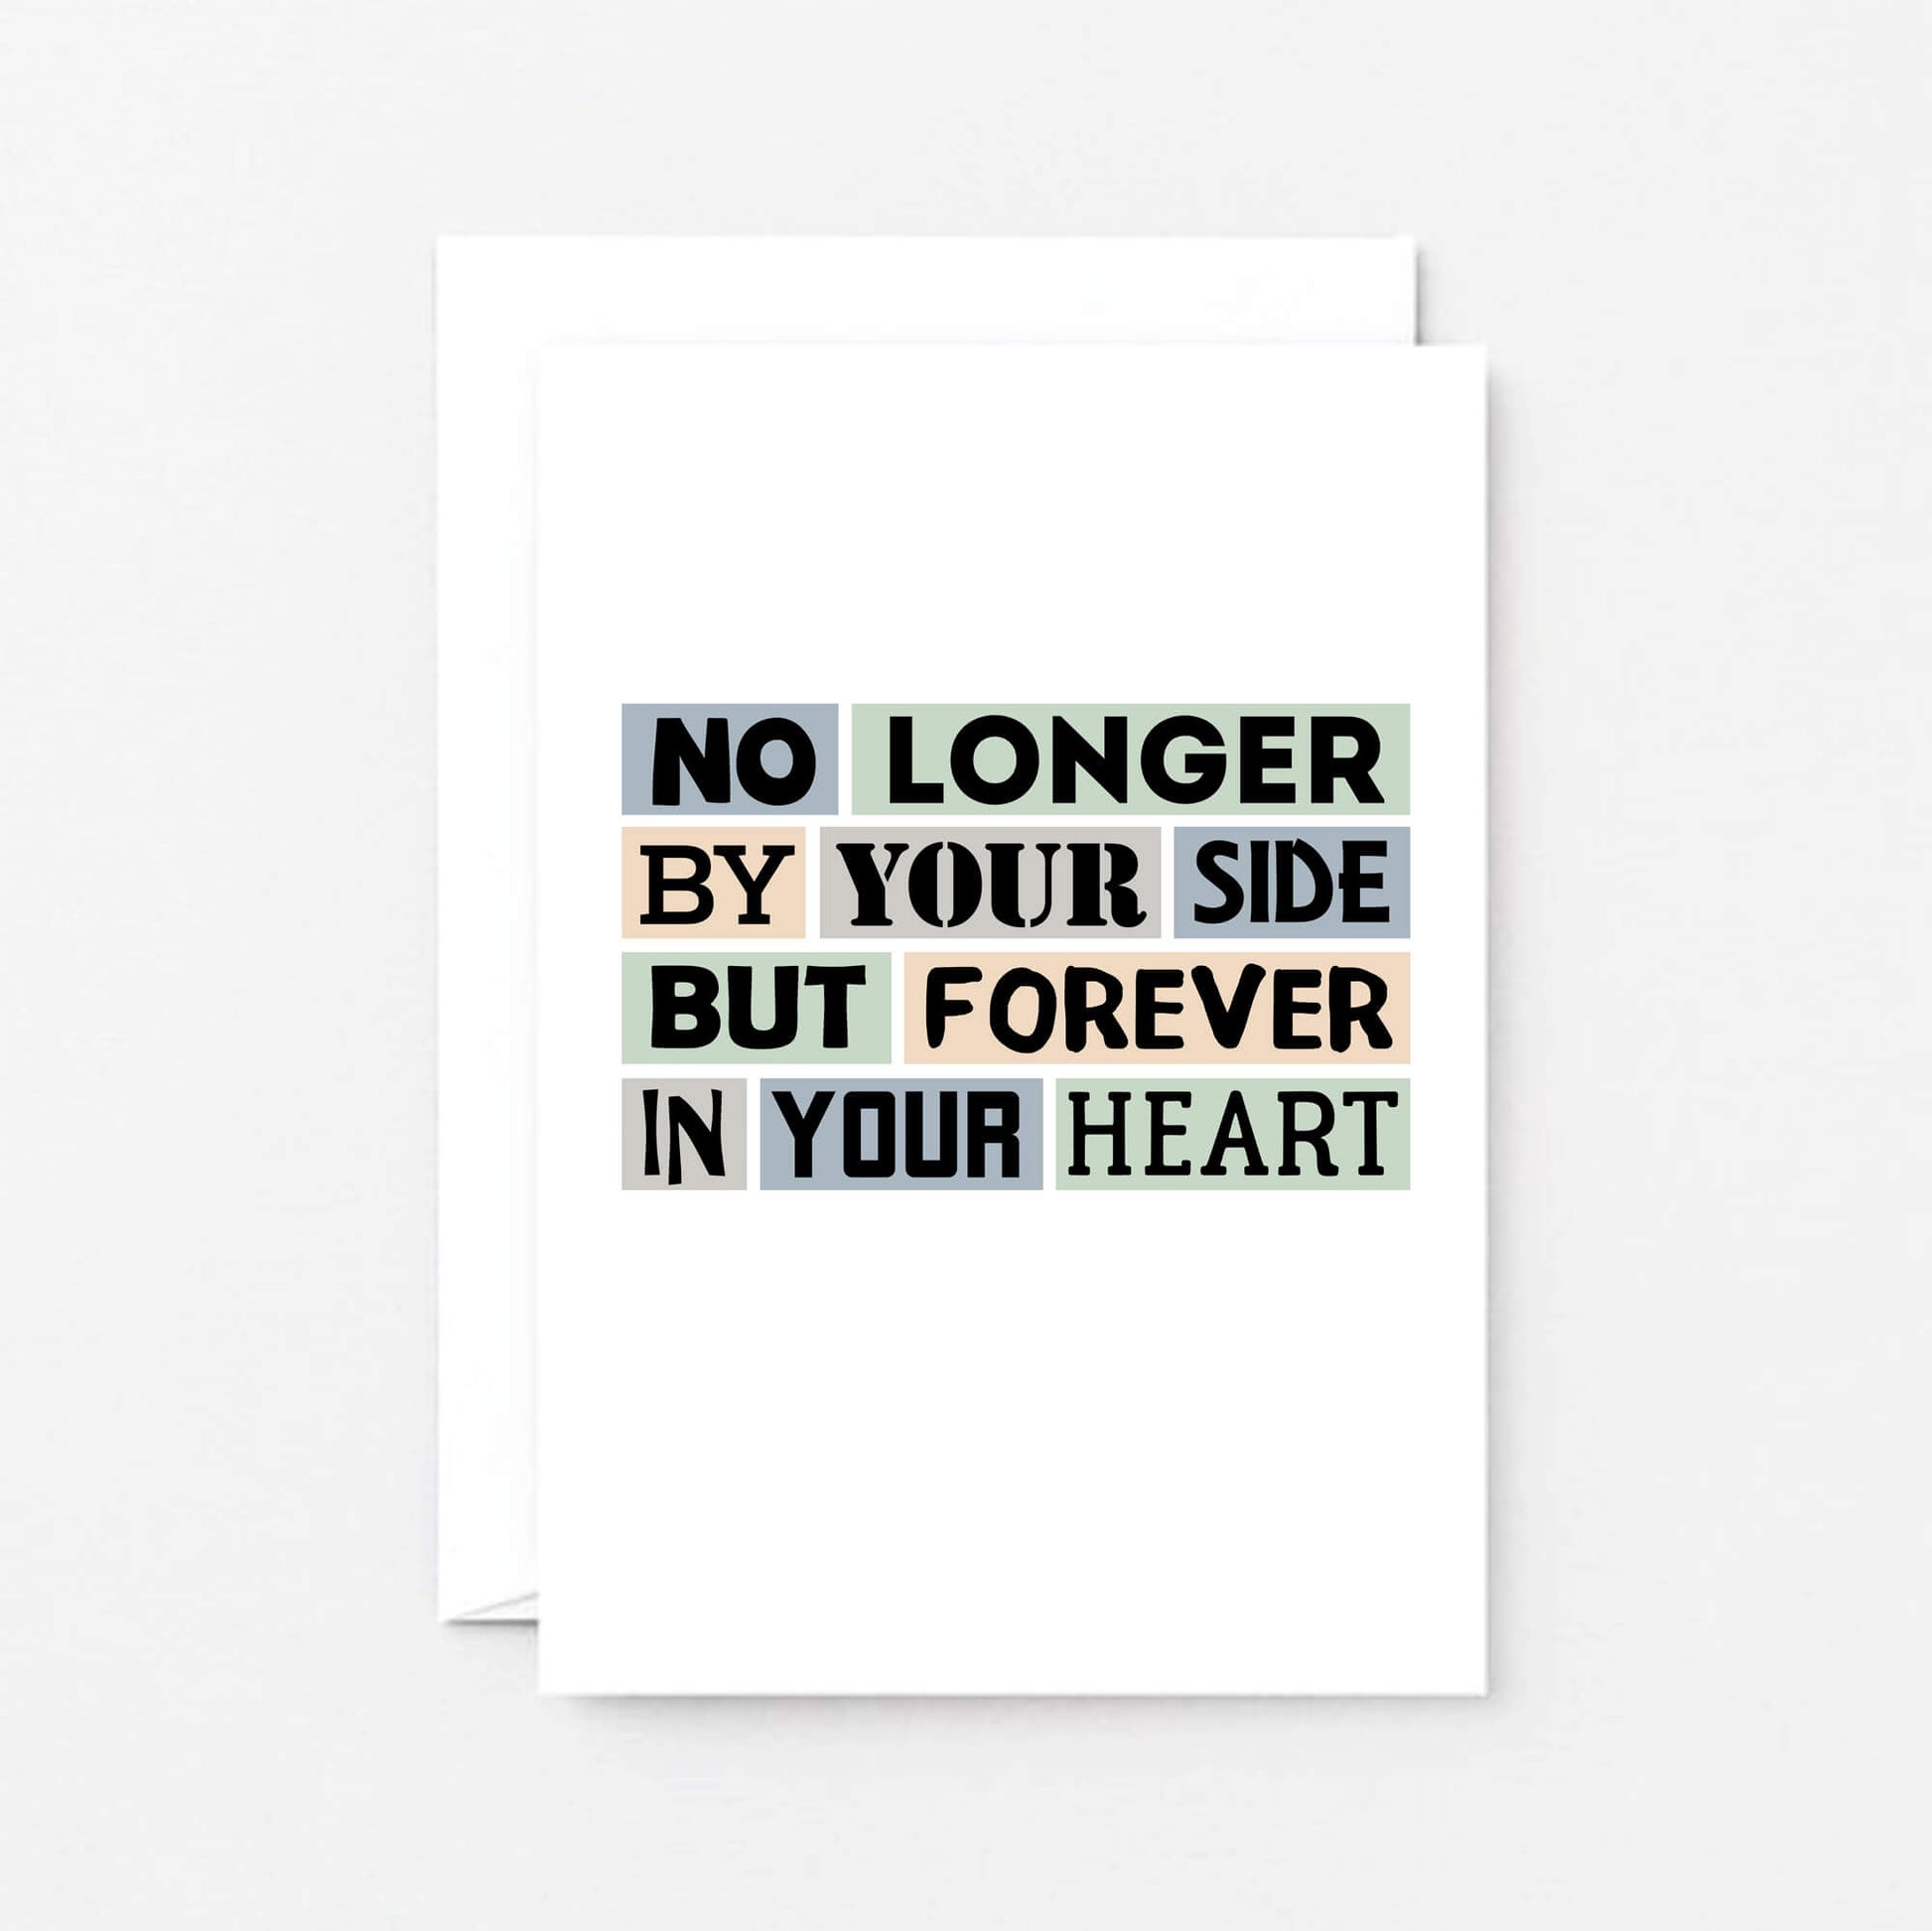 Sympathy Card by SixElevenCreations. Reads No longer by your side but forever in your heart. Product Code SE0275A6